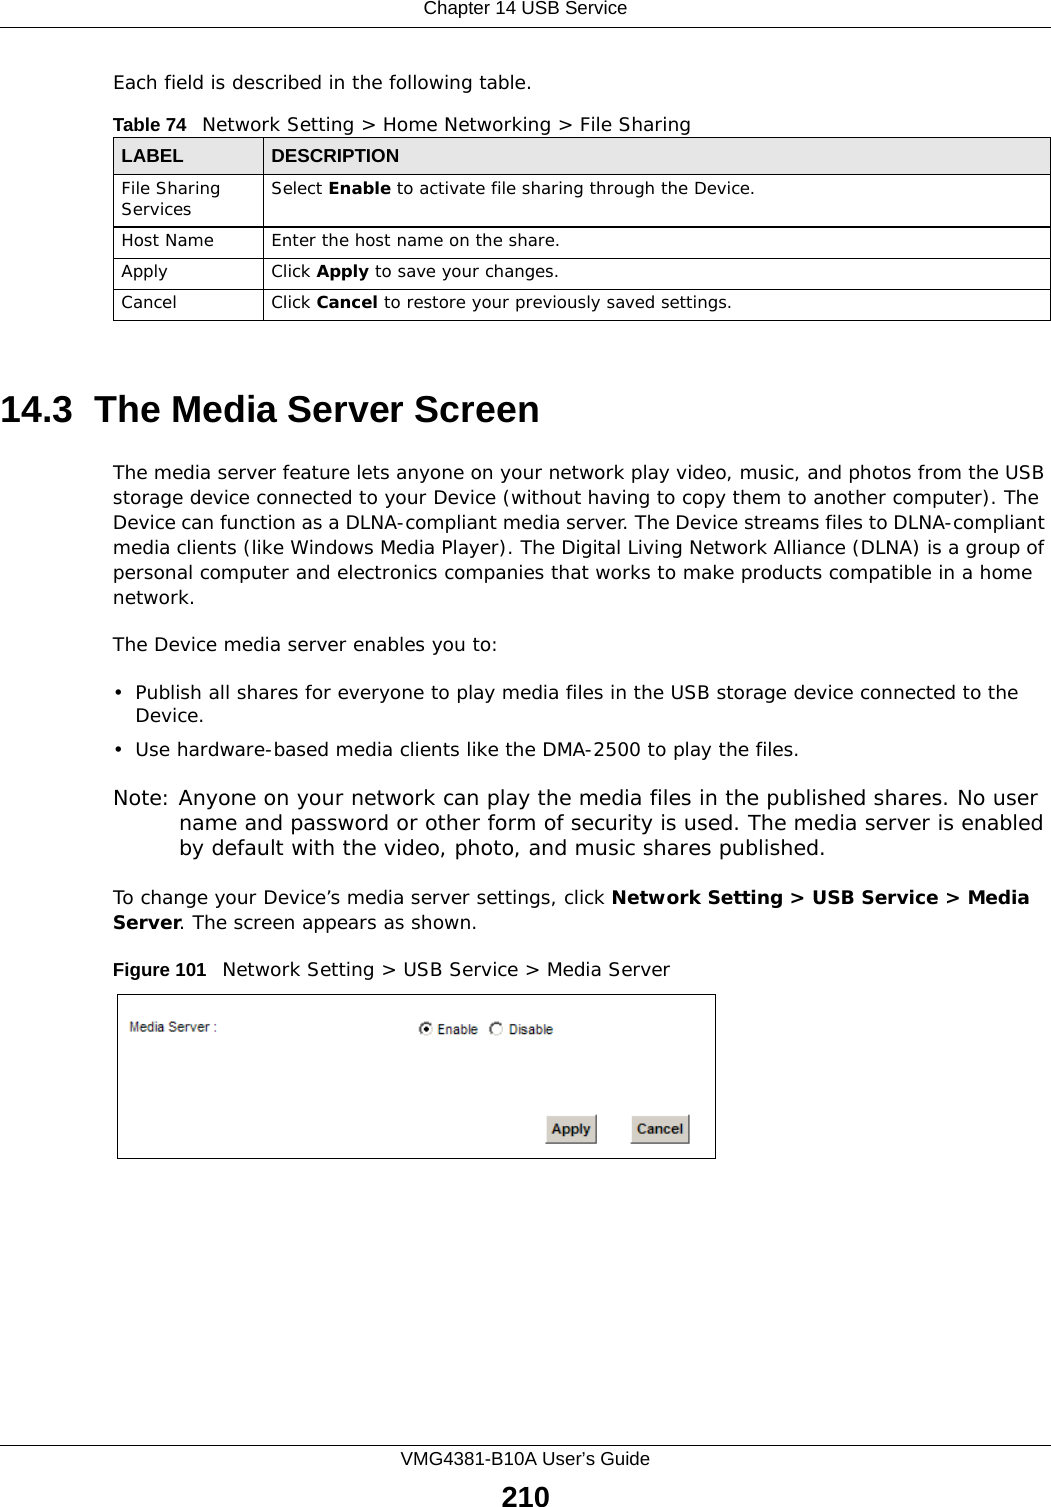 Chapter 14 USB ServiceVMG4381-B10A User’s Guide210Each field is described in the following table.14.3  The Media Server ScreenThe media server feature lets anyone on your network play video, music, and photos from the USB storage device connected to your Device (without having to copy them to another computer). The Device can function as a DLNA-compliant media server. The Device streams files to DLNA-compliant media clients (like Windows Media Player). The Digital Living Network Alliance (DLNA) is a group of personal computer and electronics companies that works to make products compatible in a home network.The Device media server enables you to:• Publish all shares for everyone to play media files in the USB storage device connected to the Device.• Use hardware-based media clients like the DMA-2500 to play the files. Note: Anyone on your network can play the media files in the published shares. No user name and password or other form of security is used. The media server is enabled by default with the video, photo, and music shares published. To change your Device’s media server settings, click Network Setting &gt; USB Service &gt; Media Server. The screen appears as shown.Figure 101   Network Setting &gt; USB Service &gt; Media ServerTable 74   Network Setting &gt; Home Networking &gt; File SharingLABEL DESCRIPTIONFile Sharing Services Select Enable to activate file sharing through the Device. Host Name Enter the host name on the share.Apply Click Apply to save your changes.Cancel Click Cancel to restore your previously saved settings.